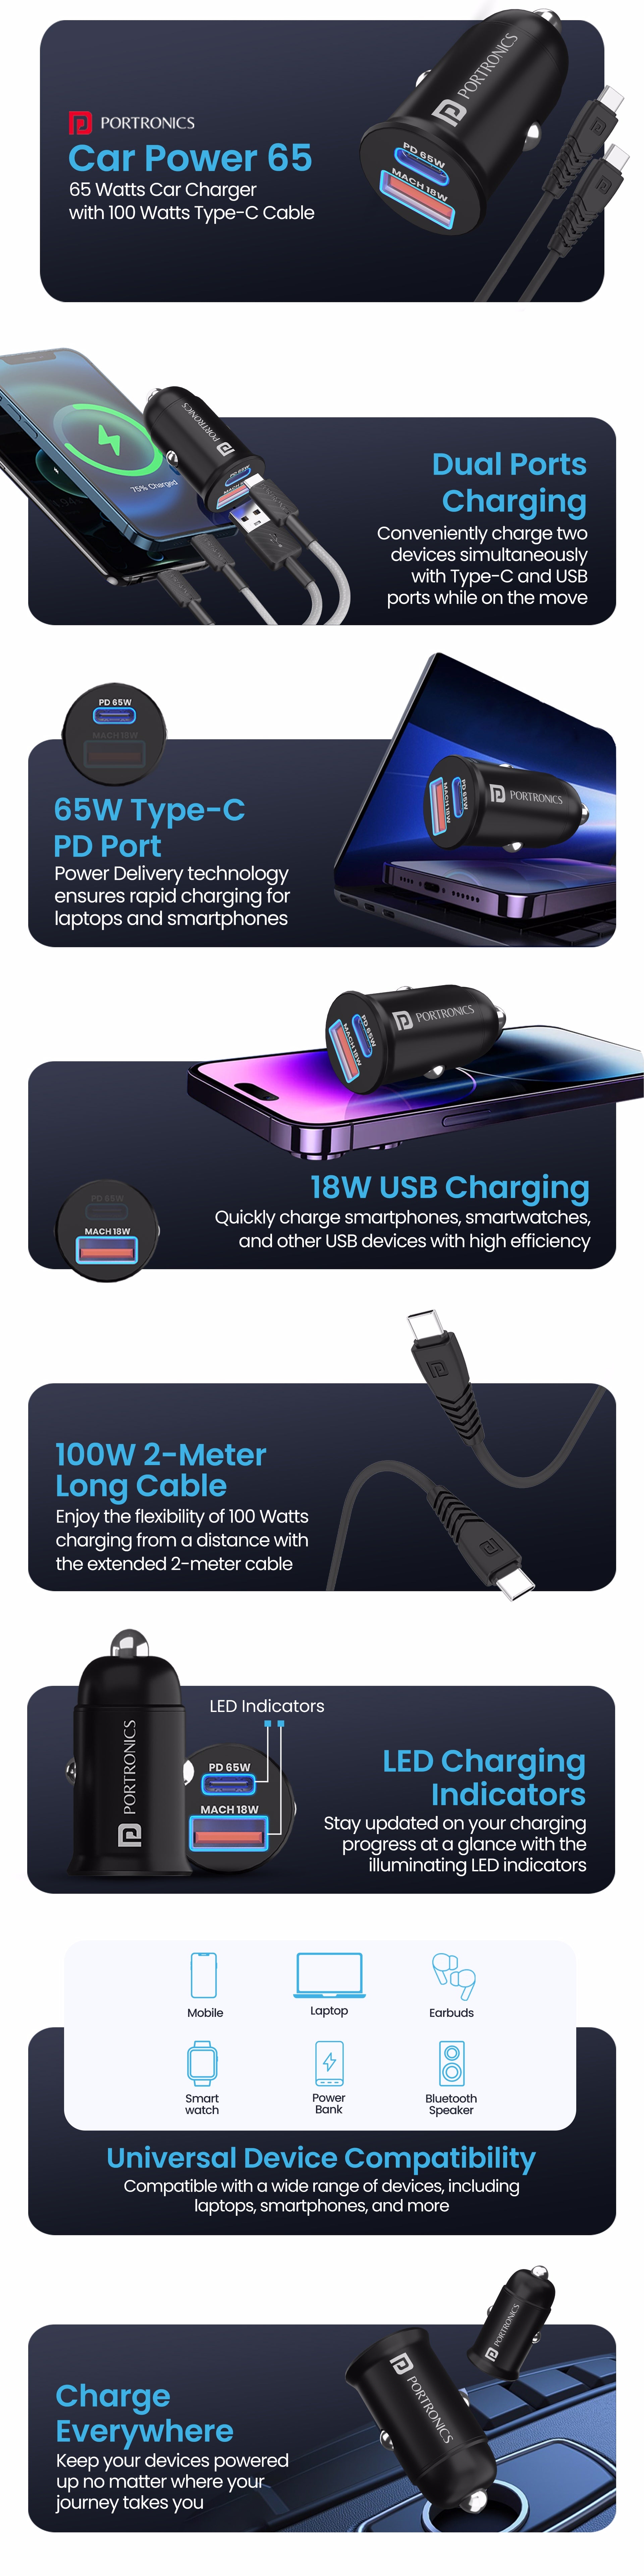 Portronics Car Power 65 best car charger | car phone charger With Compact Body Design